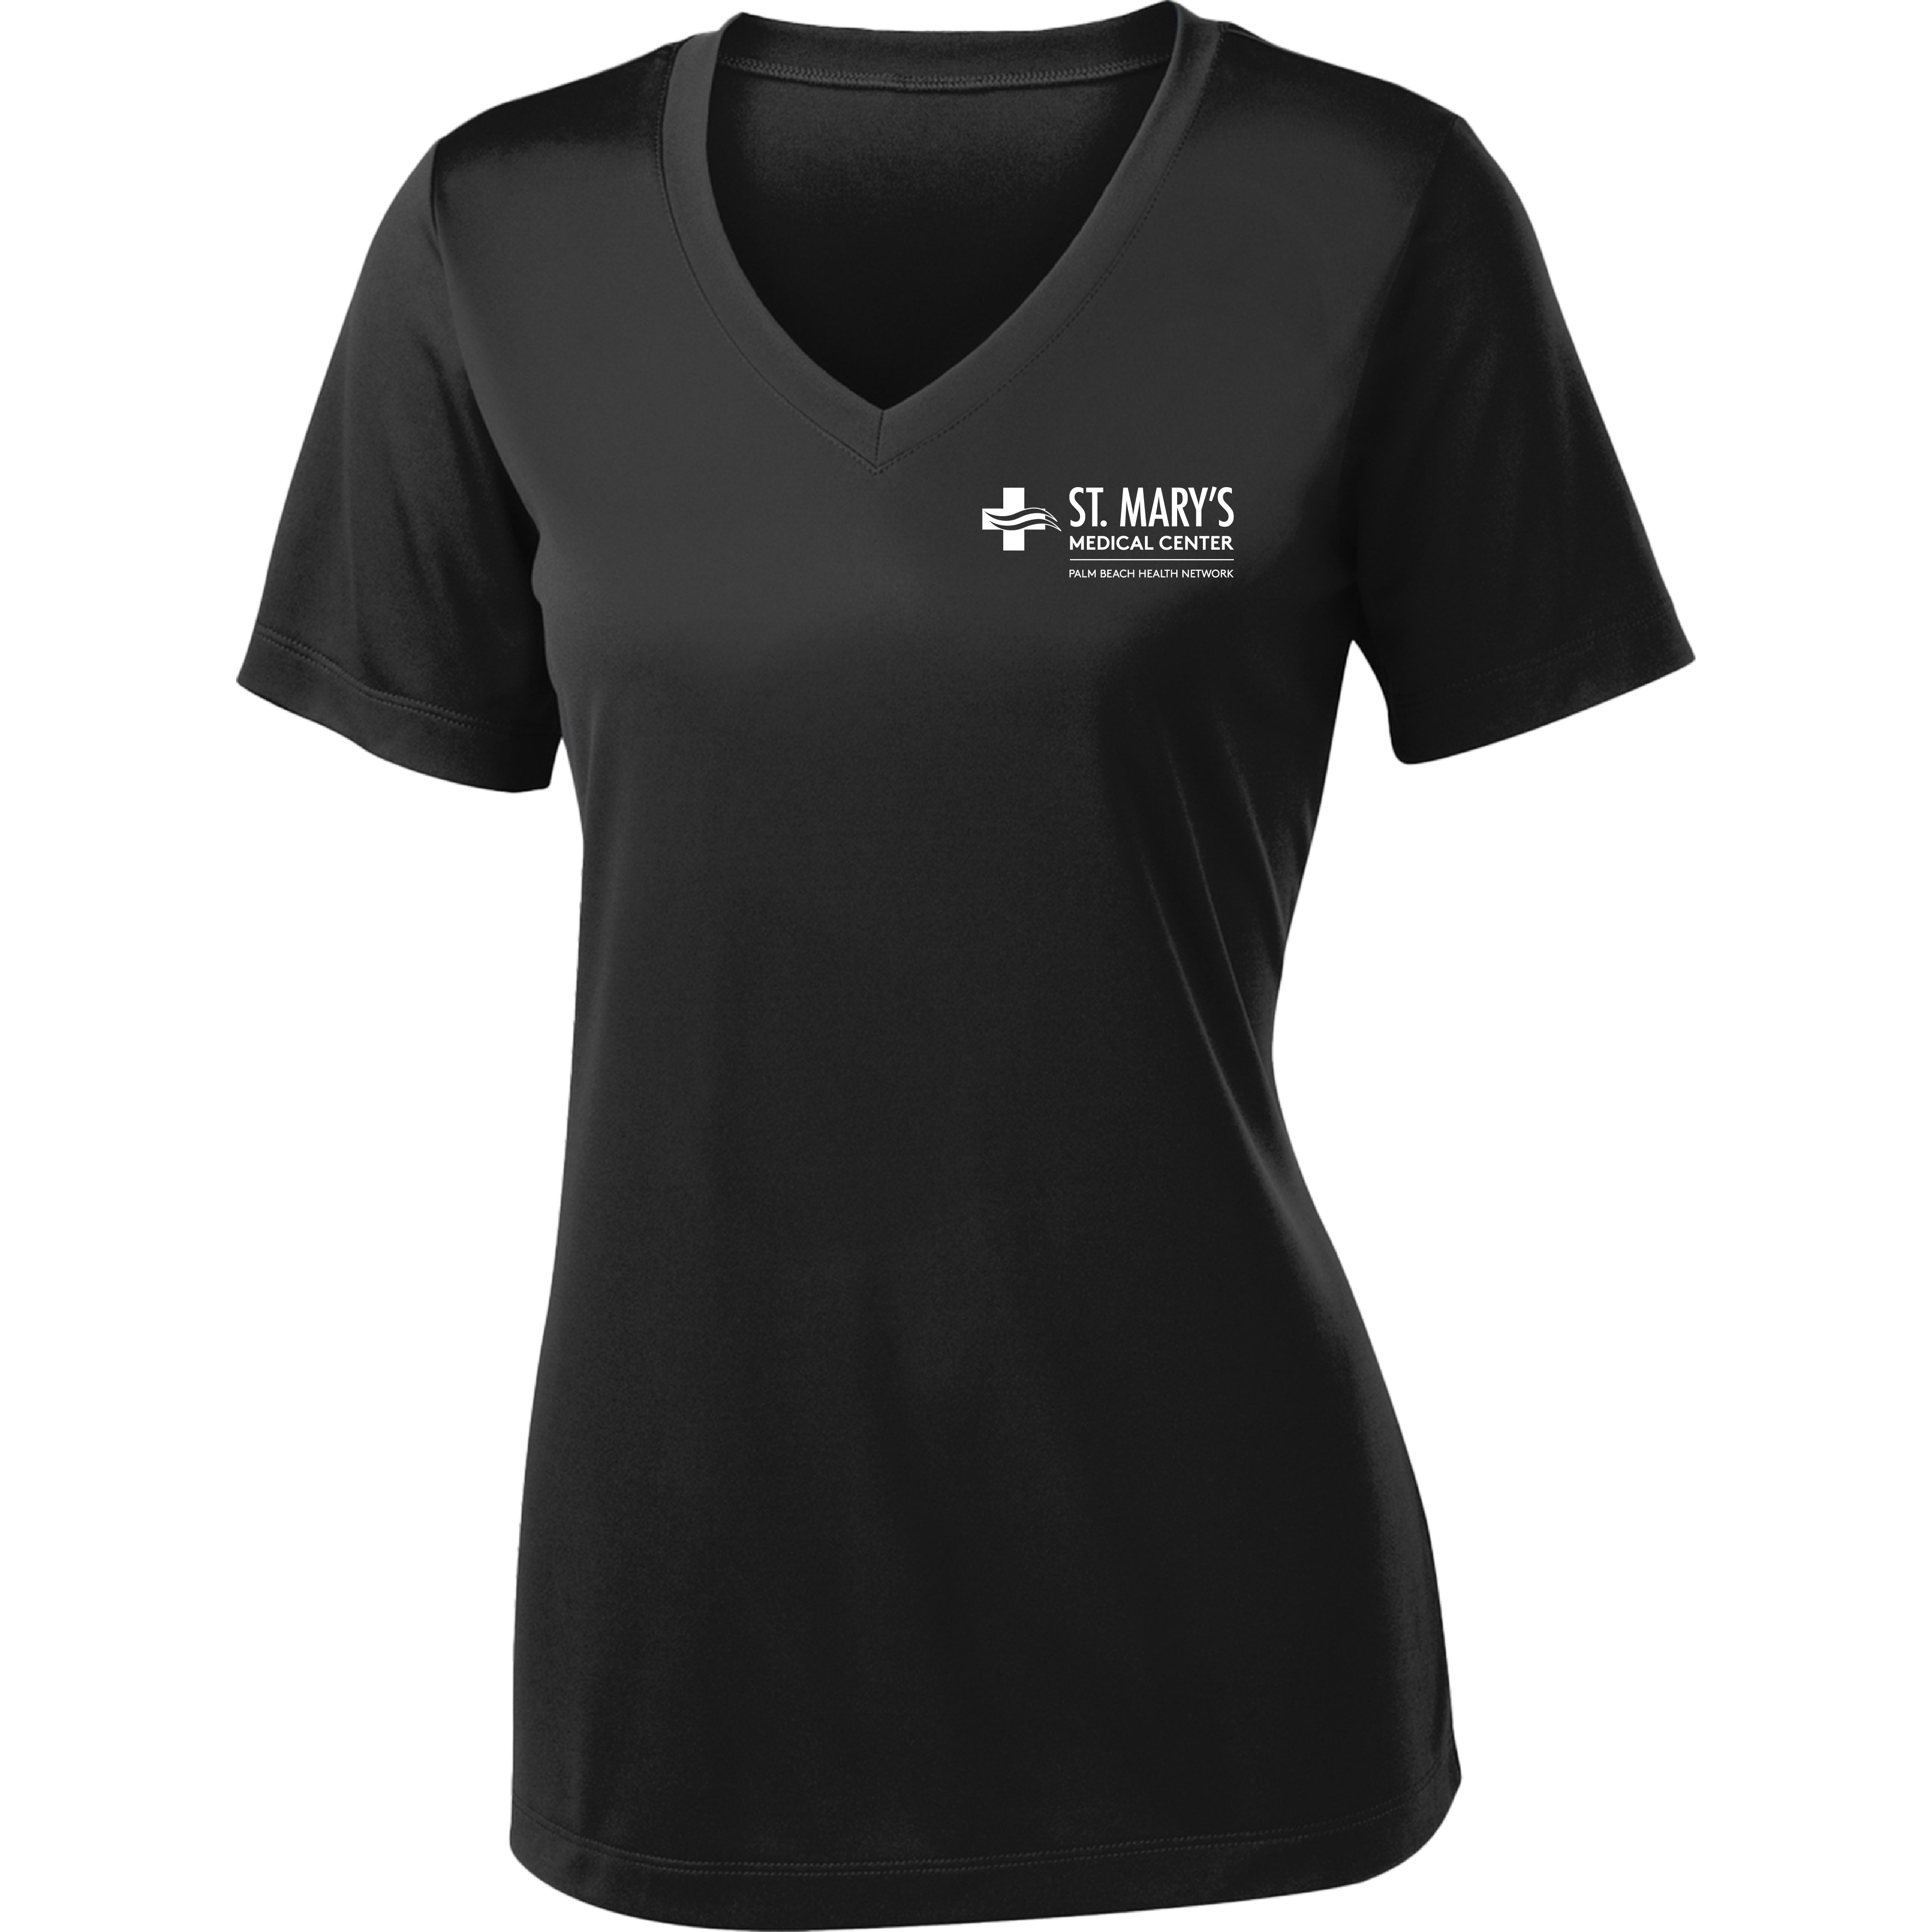 St. Mary's Hospital - Clean Hands Save Lives PERFORMANCE V-Neck